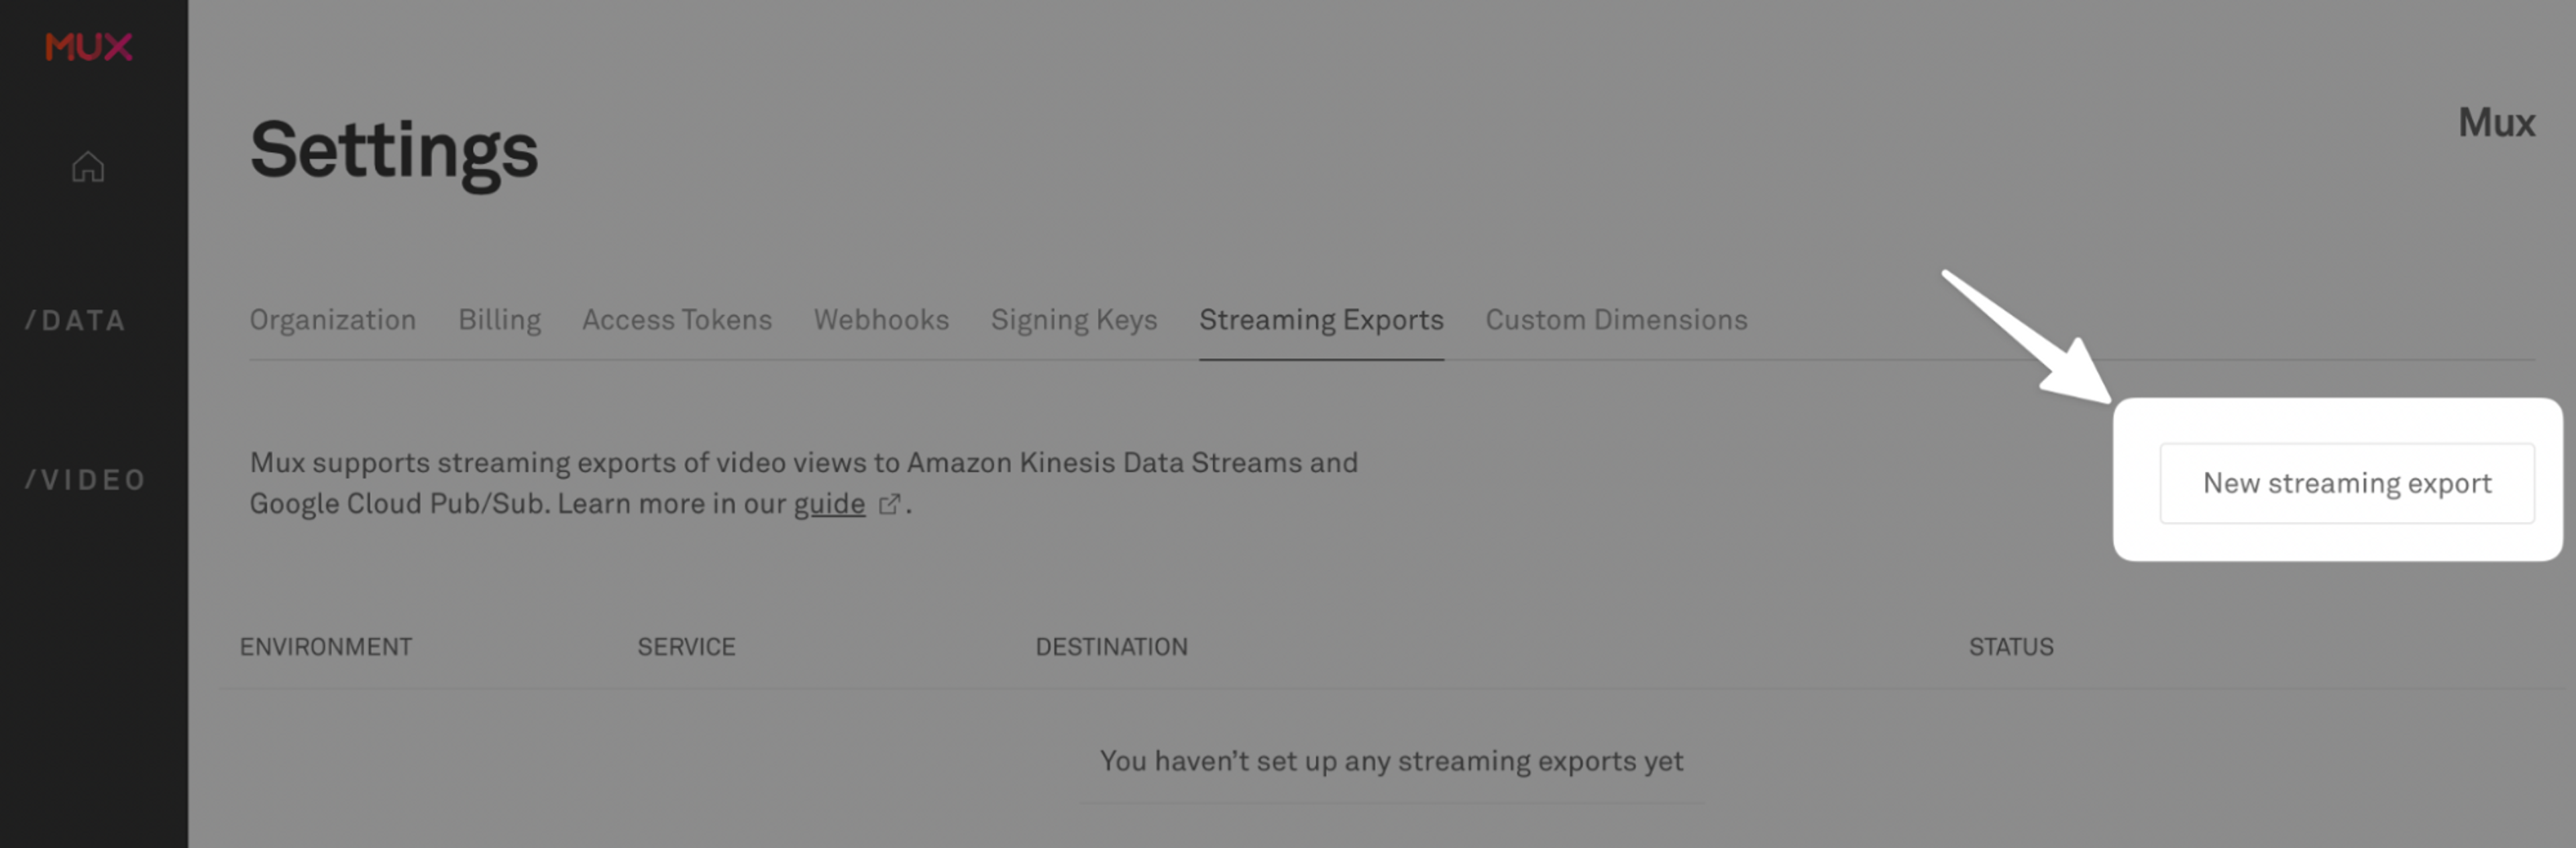 A screenshot showing a button for creating a New steaming export